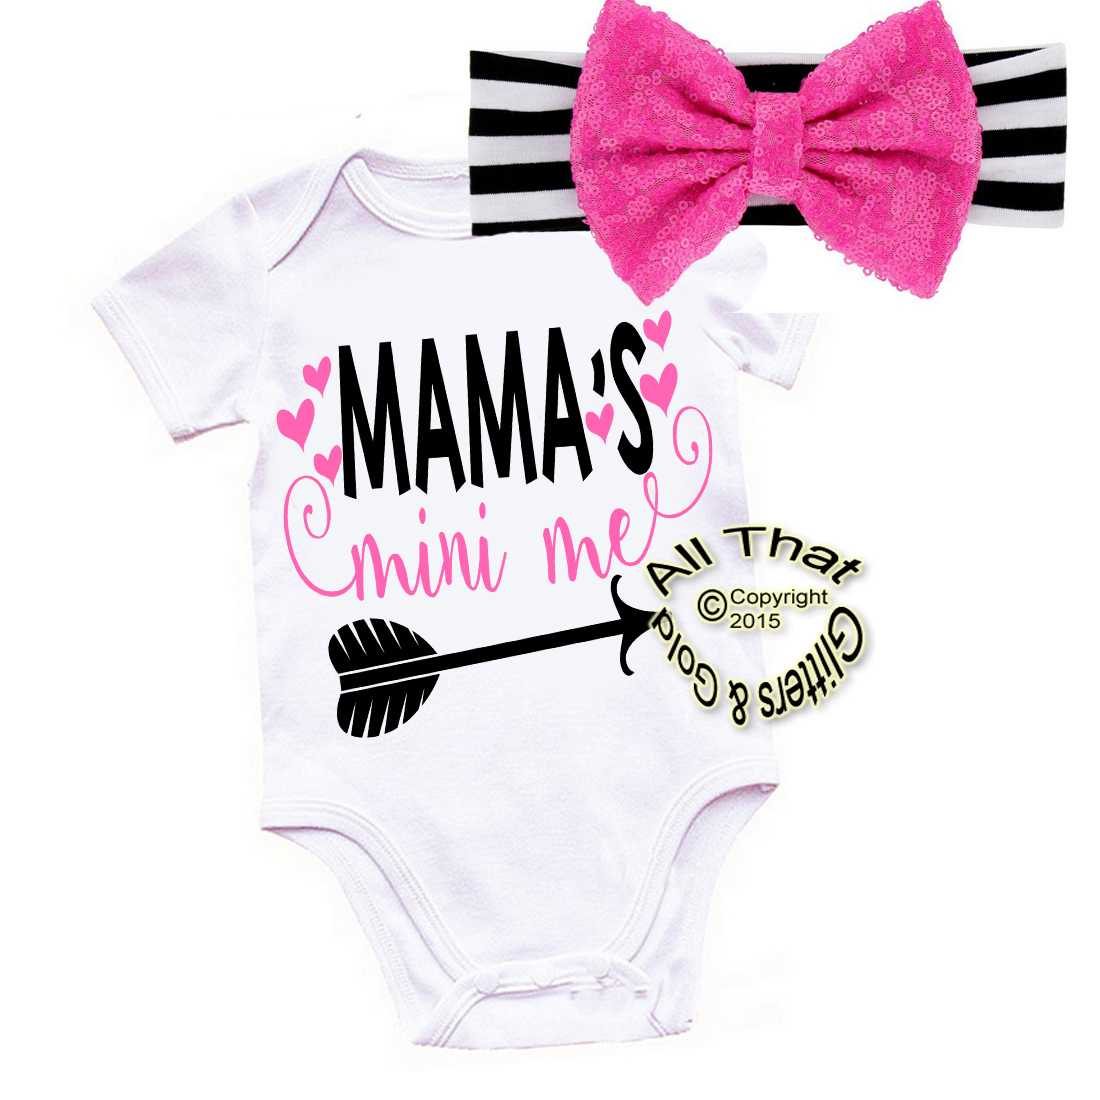 Black, Hot Pink and White Mama's Mini Shirt or Outfit For Girls